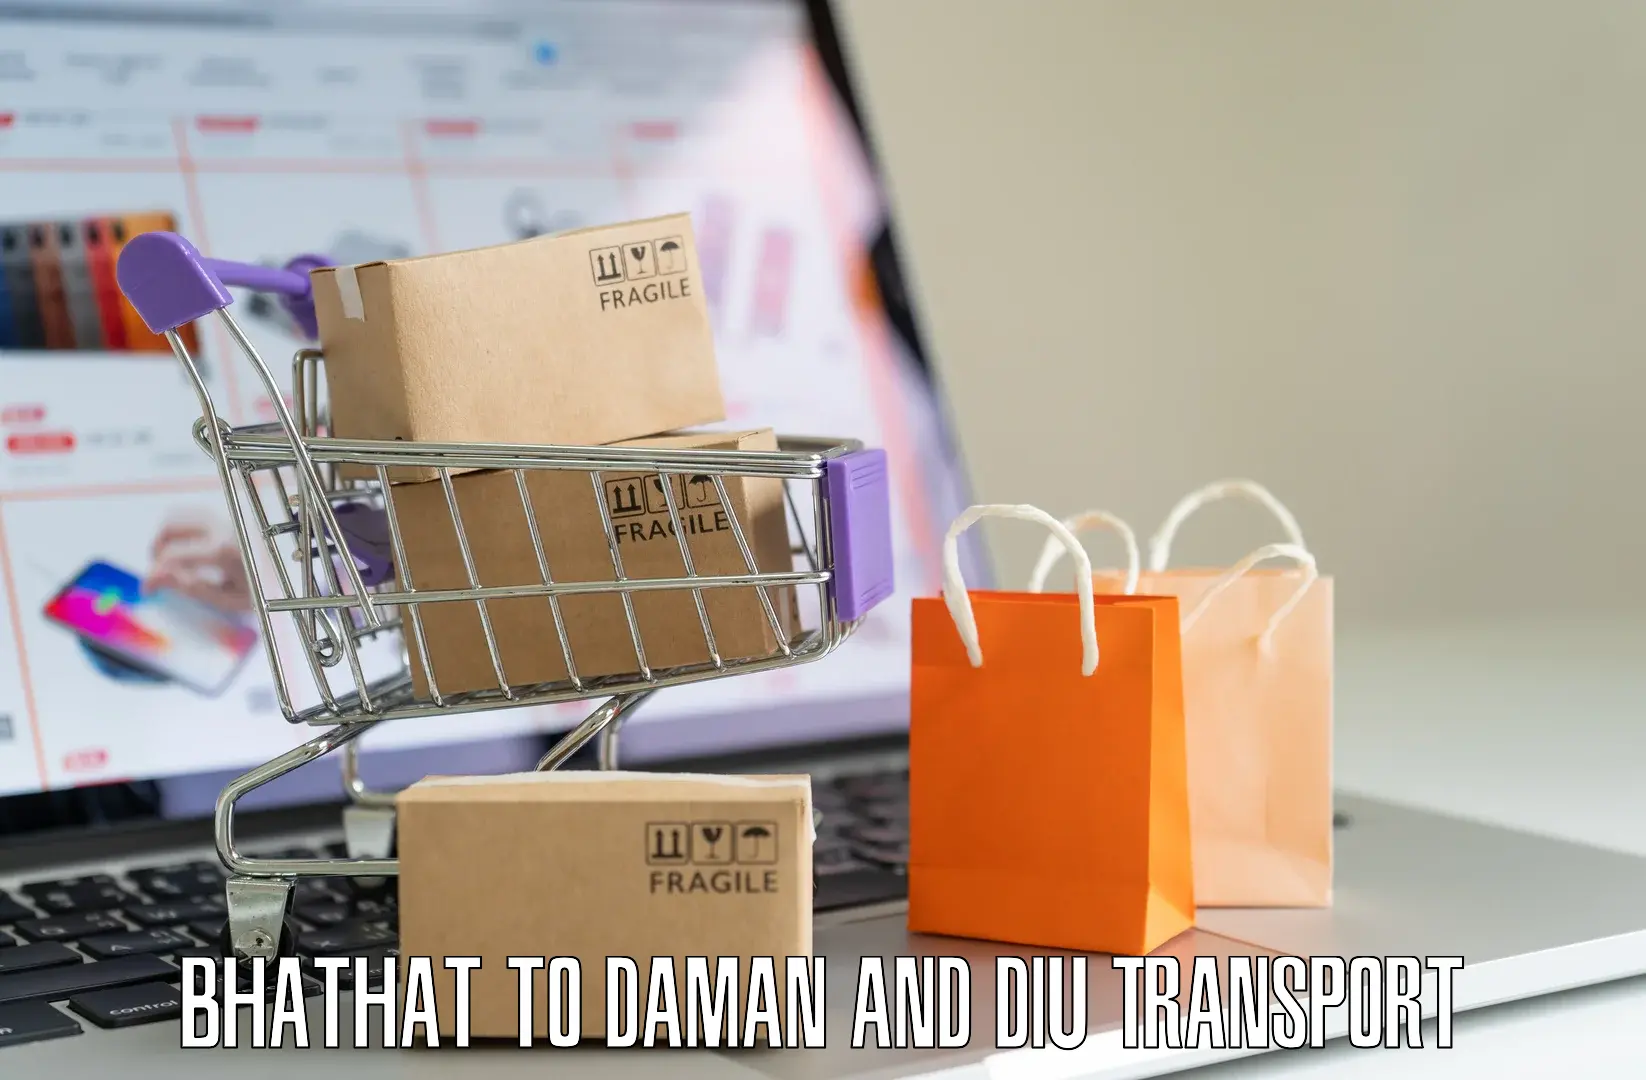 Parcel transport services Bhathat to Daman